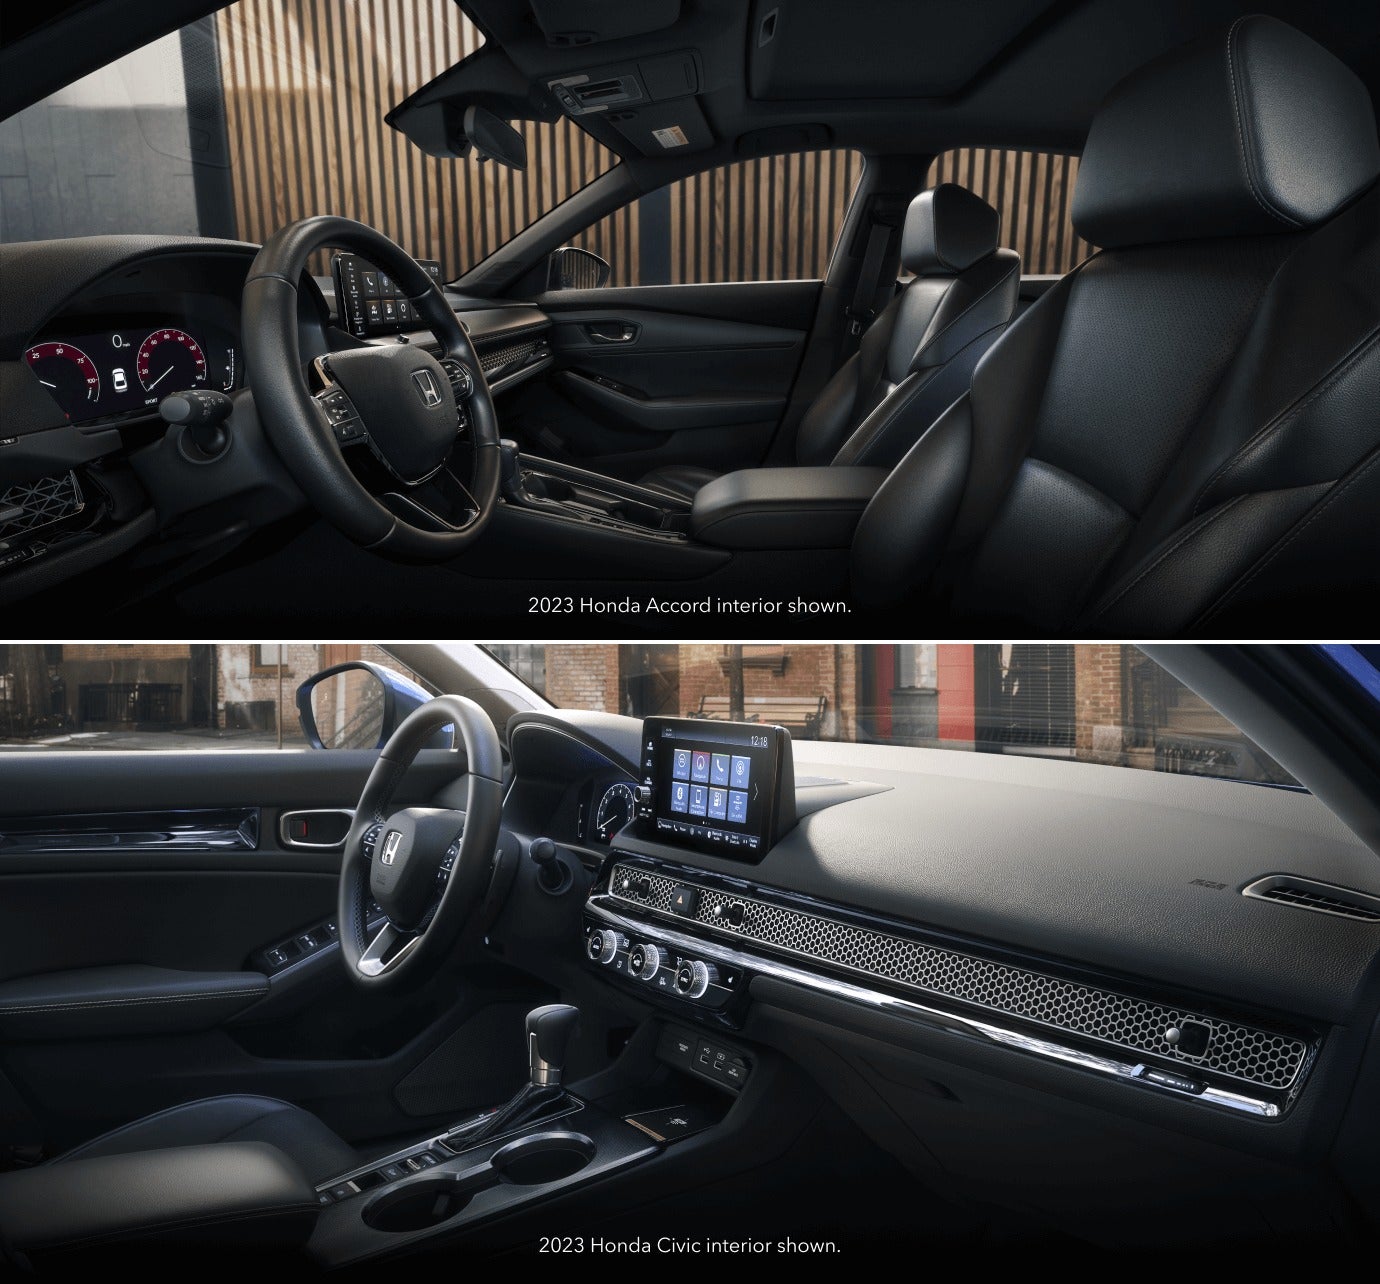 image of the dashboards of a Civic and an Accord